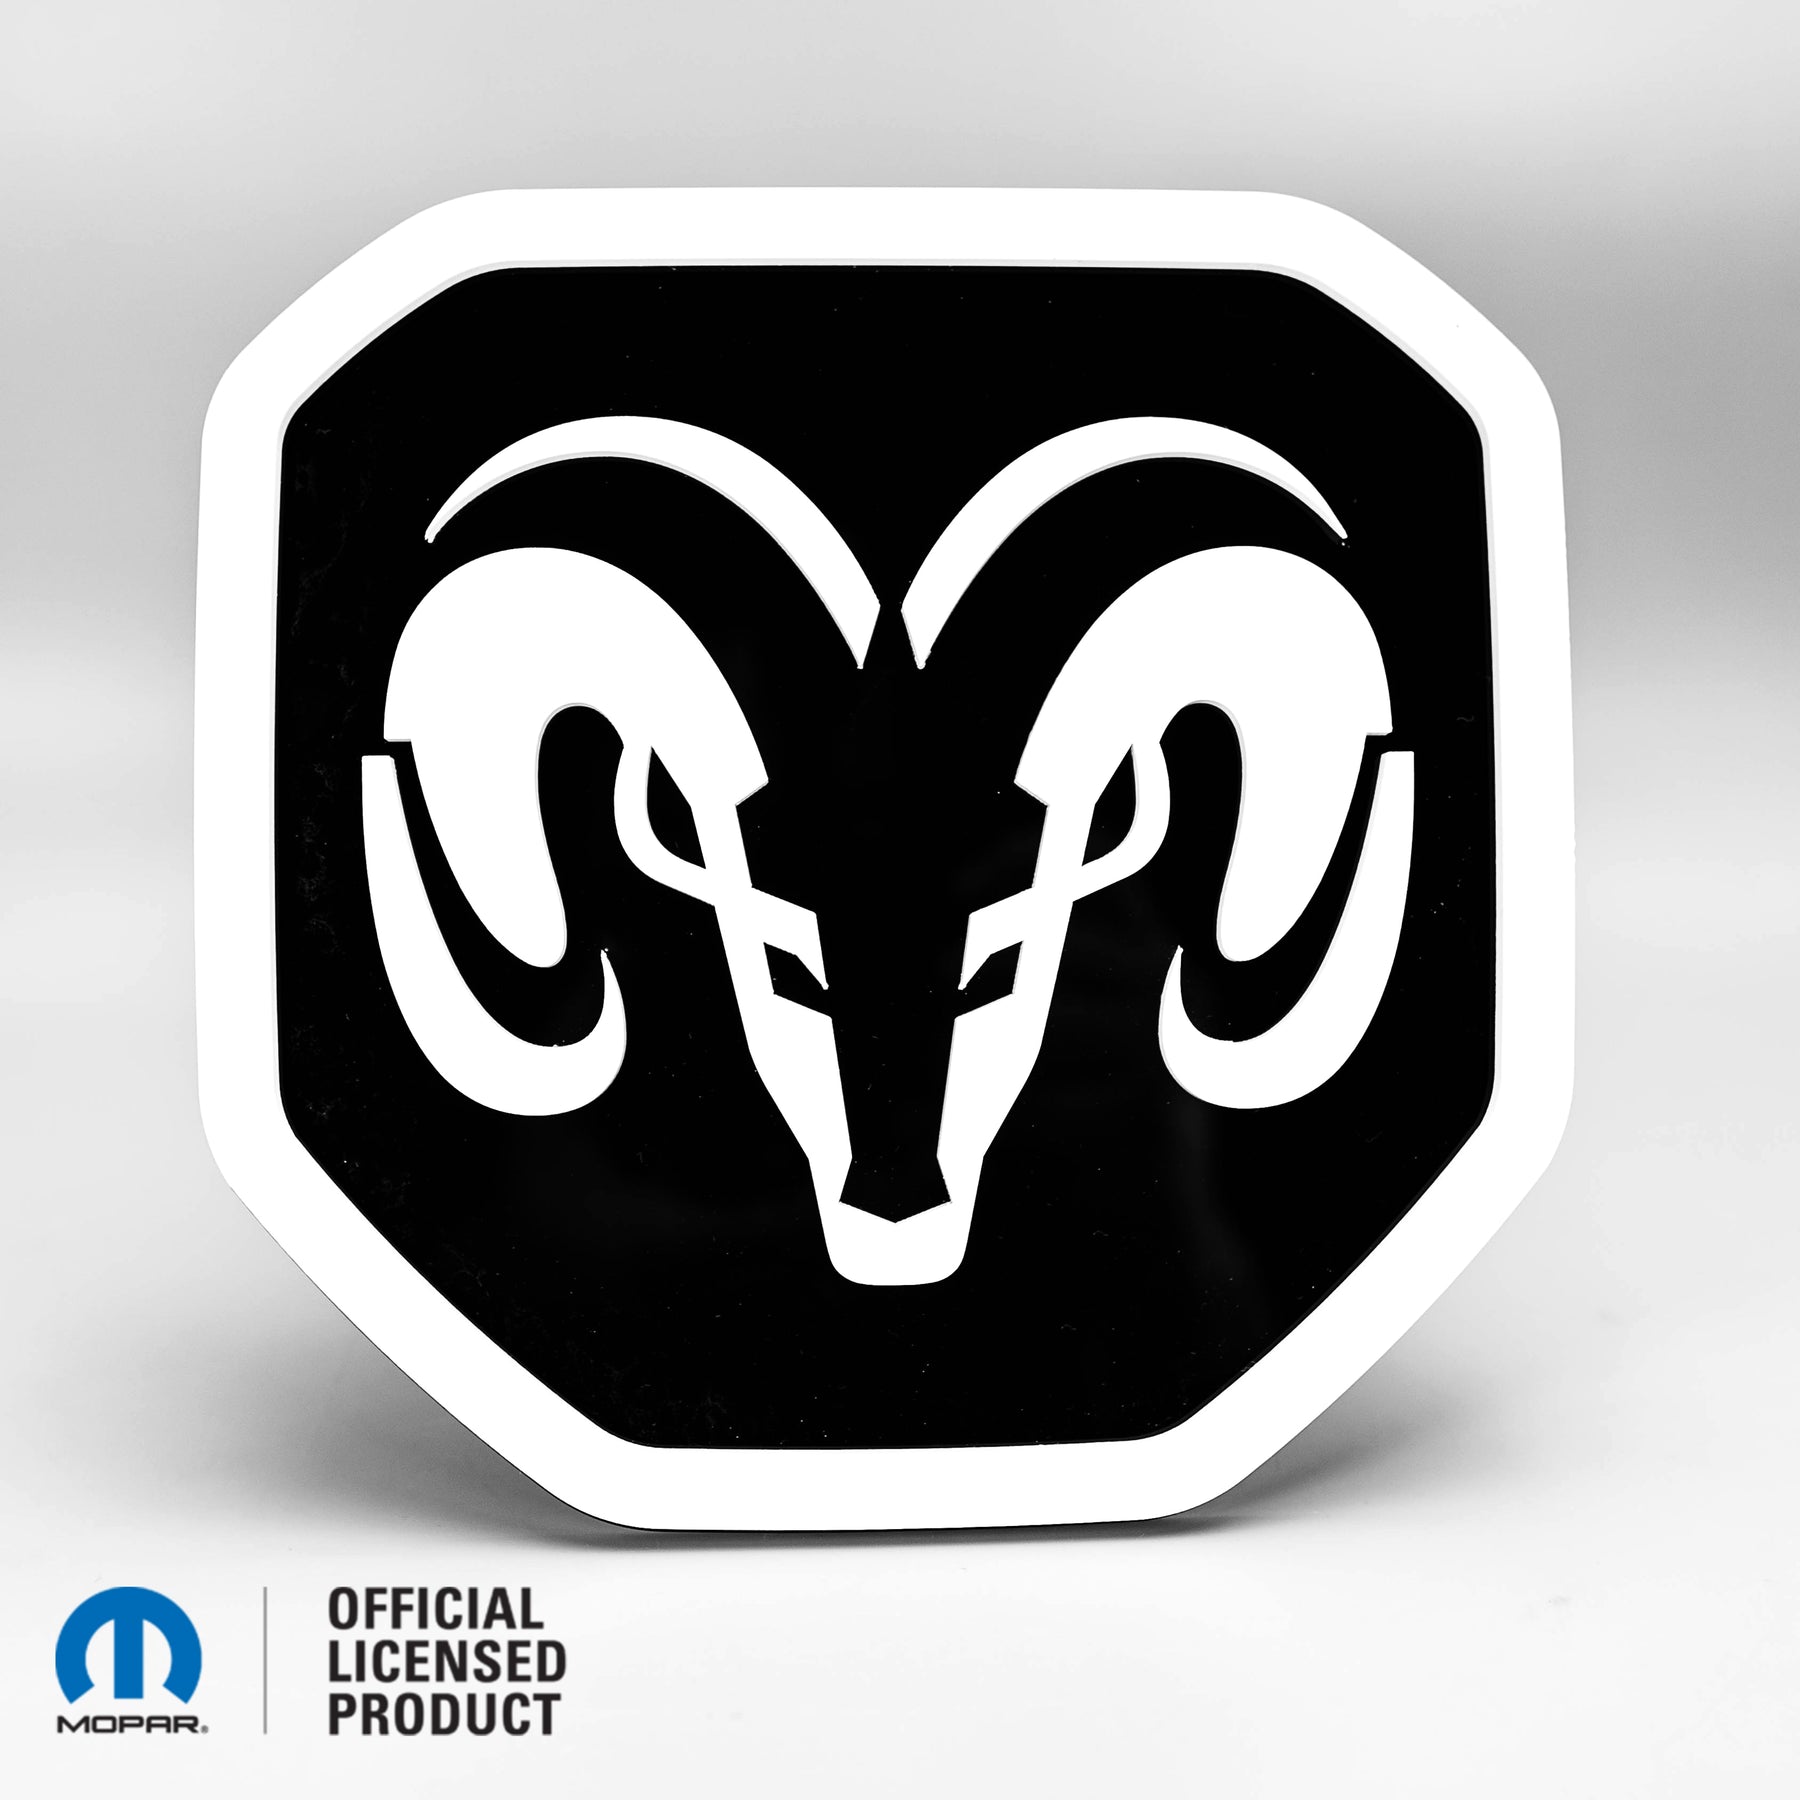 RAM® Head Logo Style 1 Tailgate Badge - Fits 2019-2023 RAM® Tailgate - 1500, 2500, 3500 - WHITE on GLOSS - Officially Licensed Product